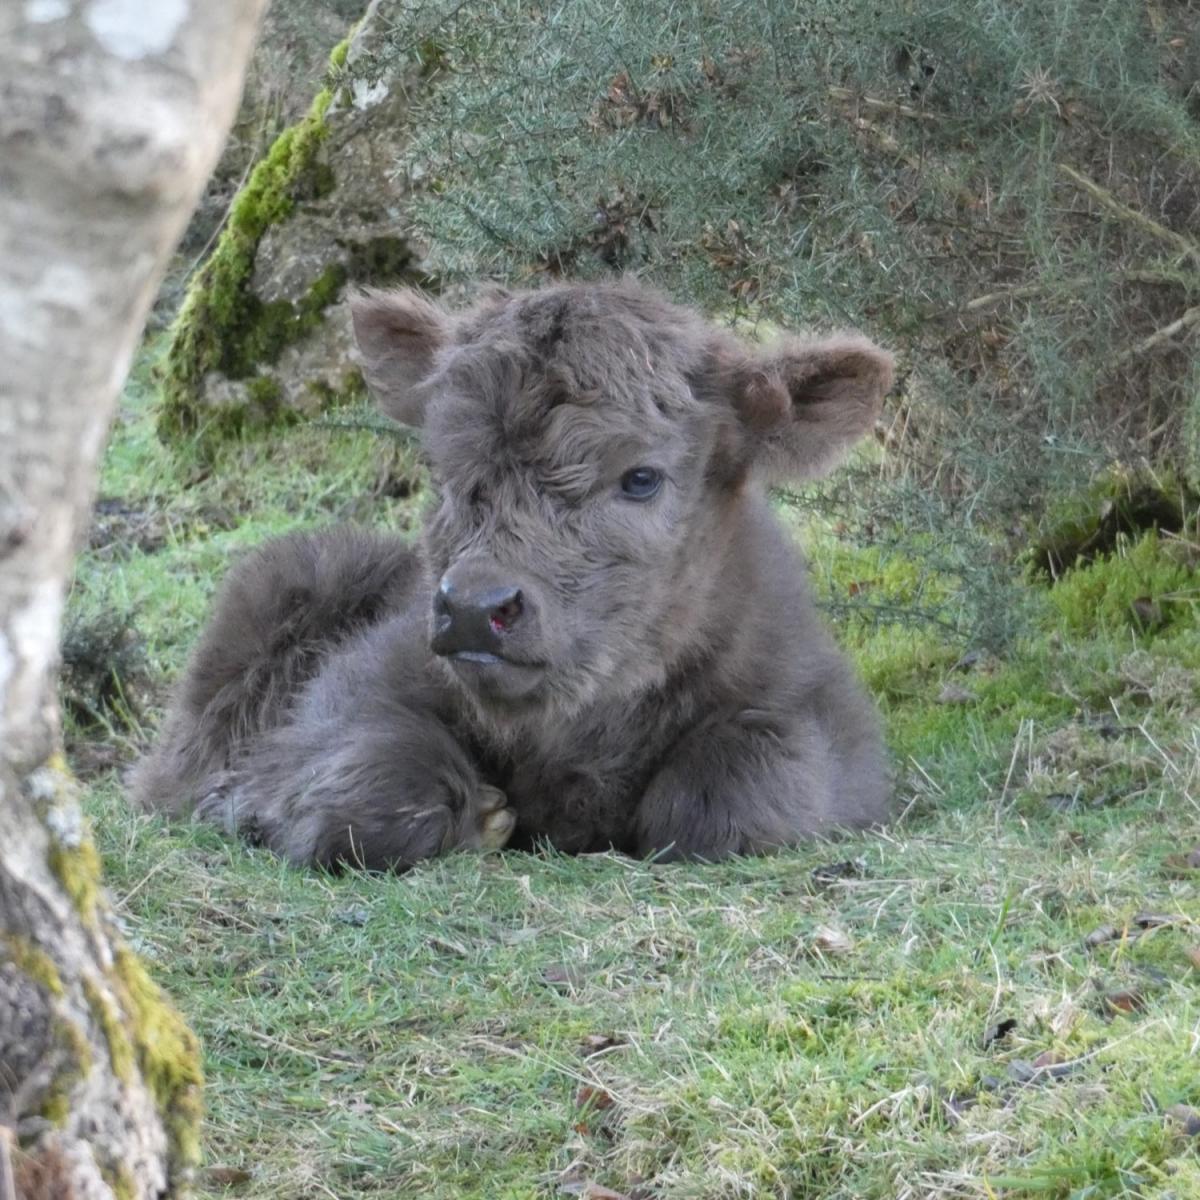 Alison Hood (Drumad Estate) - Dee at 2 days old. She is a pedigree highland